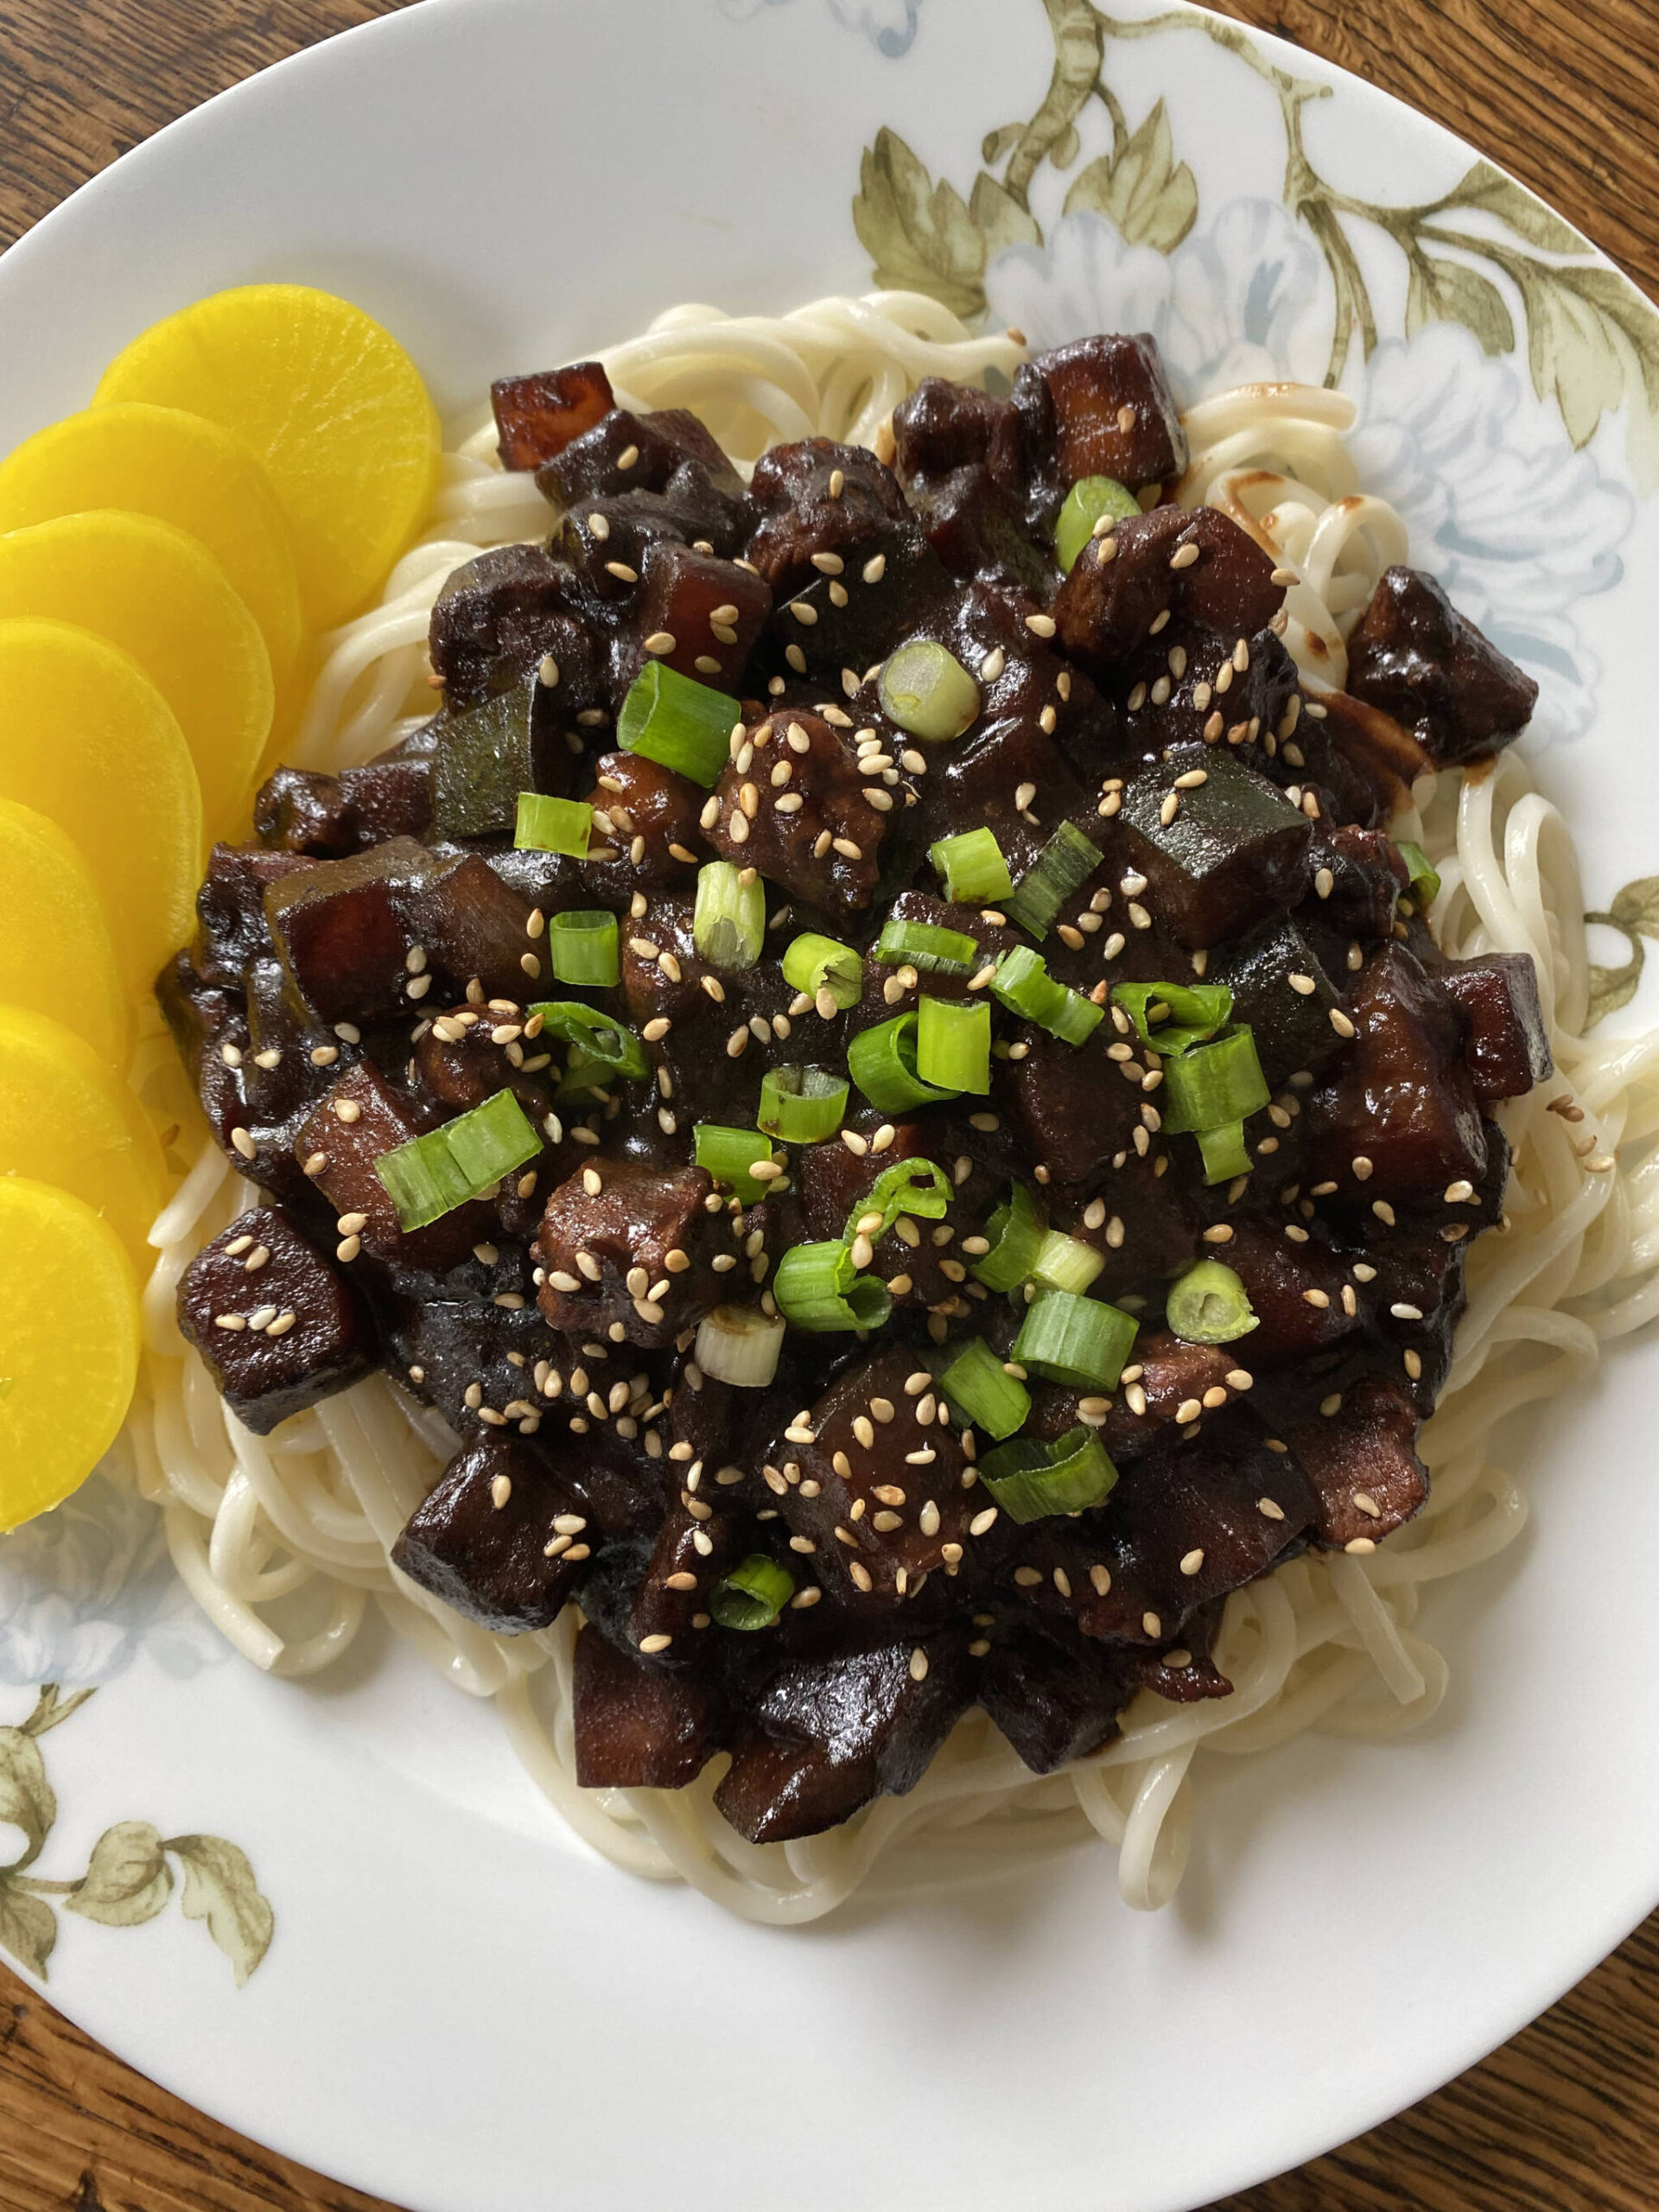 A favorite of Korean kids and college kids alike, Korean black bean noodles are an everyday takeout staple. (Photo by Tressa Dale/Peninsula Clarion)